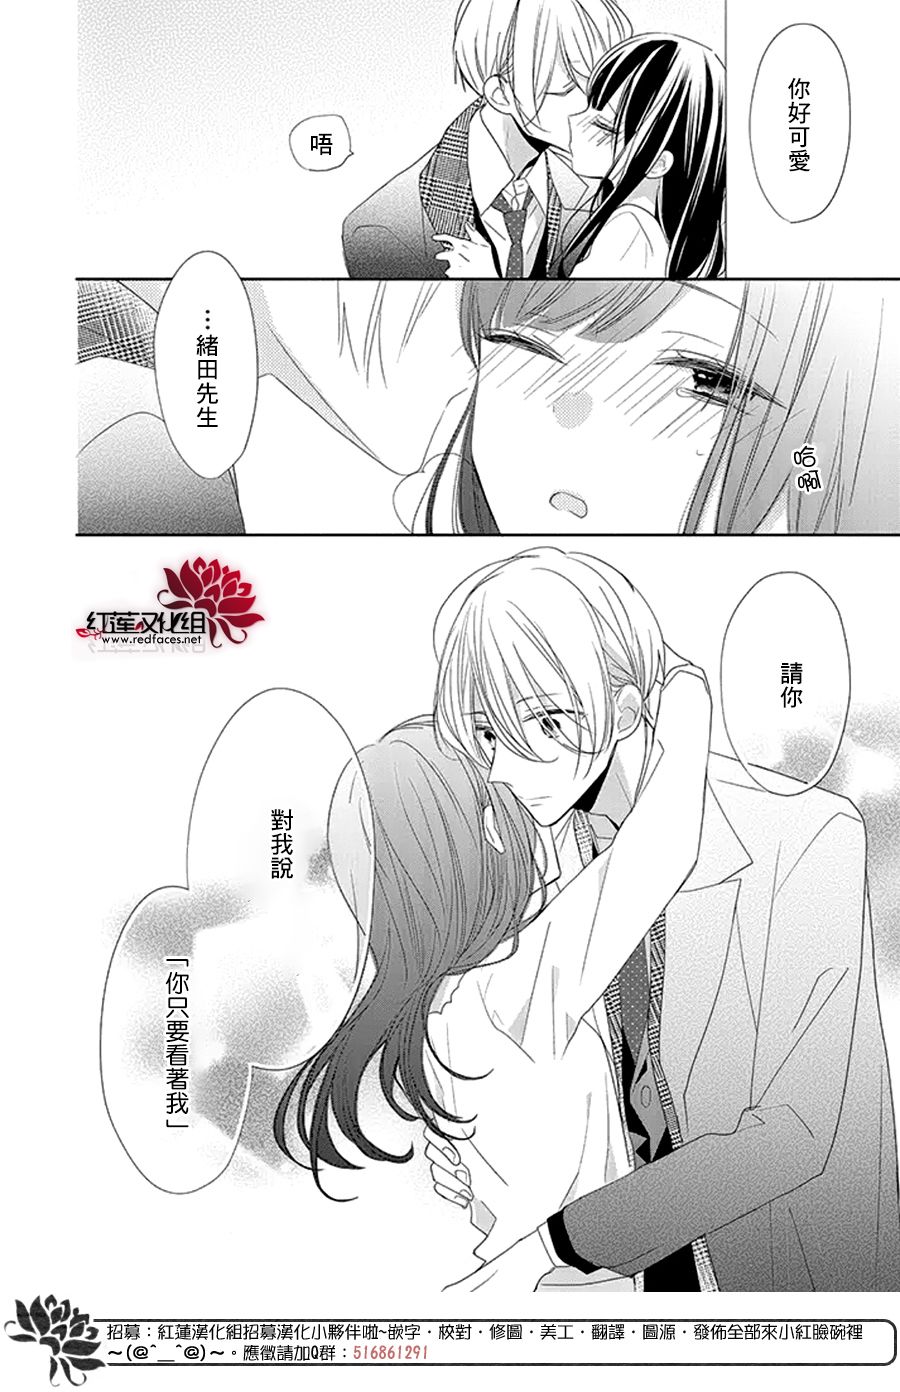 If given a second chance - 21話 - 4